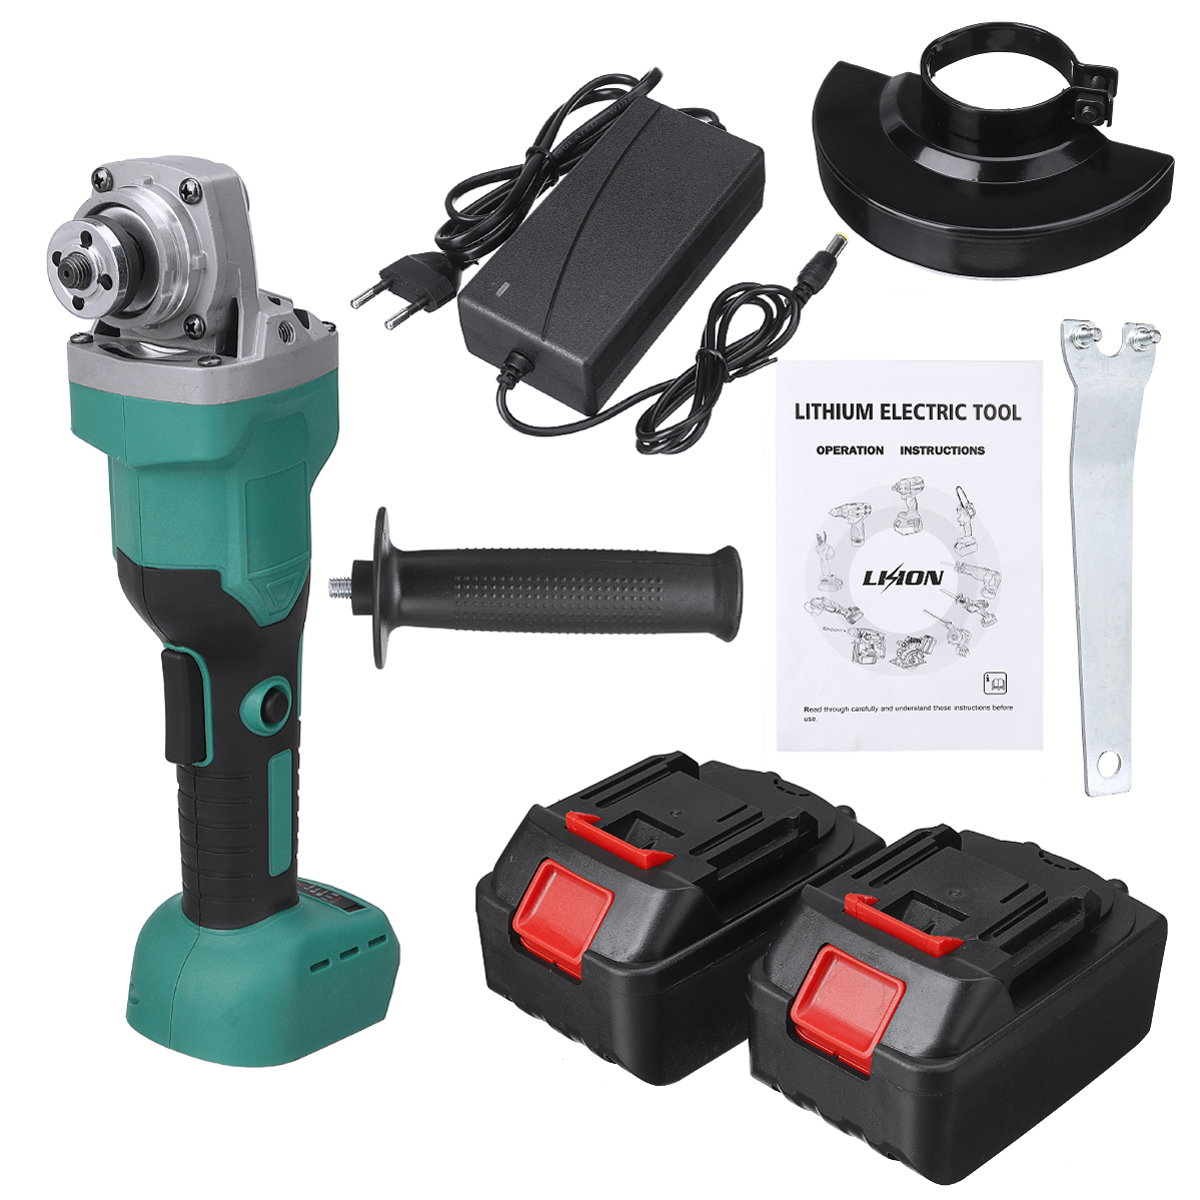 100mm125mm-Brushless-Electric-Angle-Grinder-Polishing-Grinding-Cutting-Tool-W-12-Battery-For-Makita-1861077-10